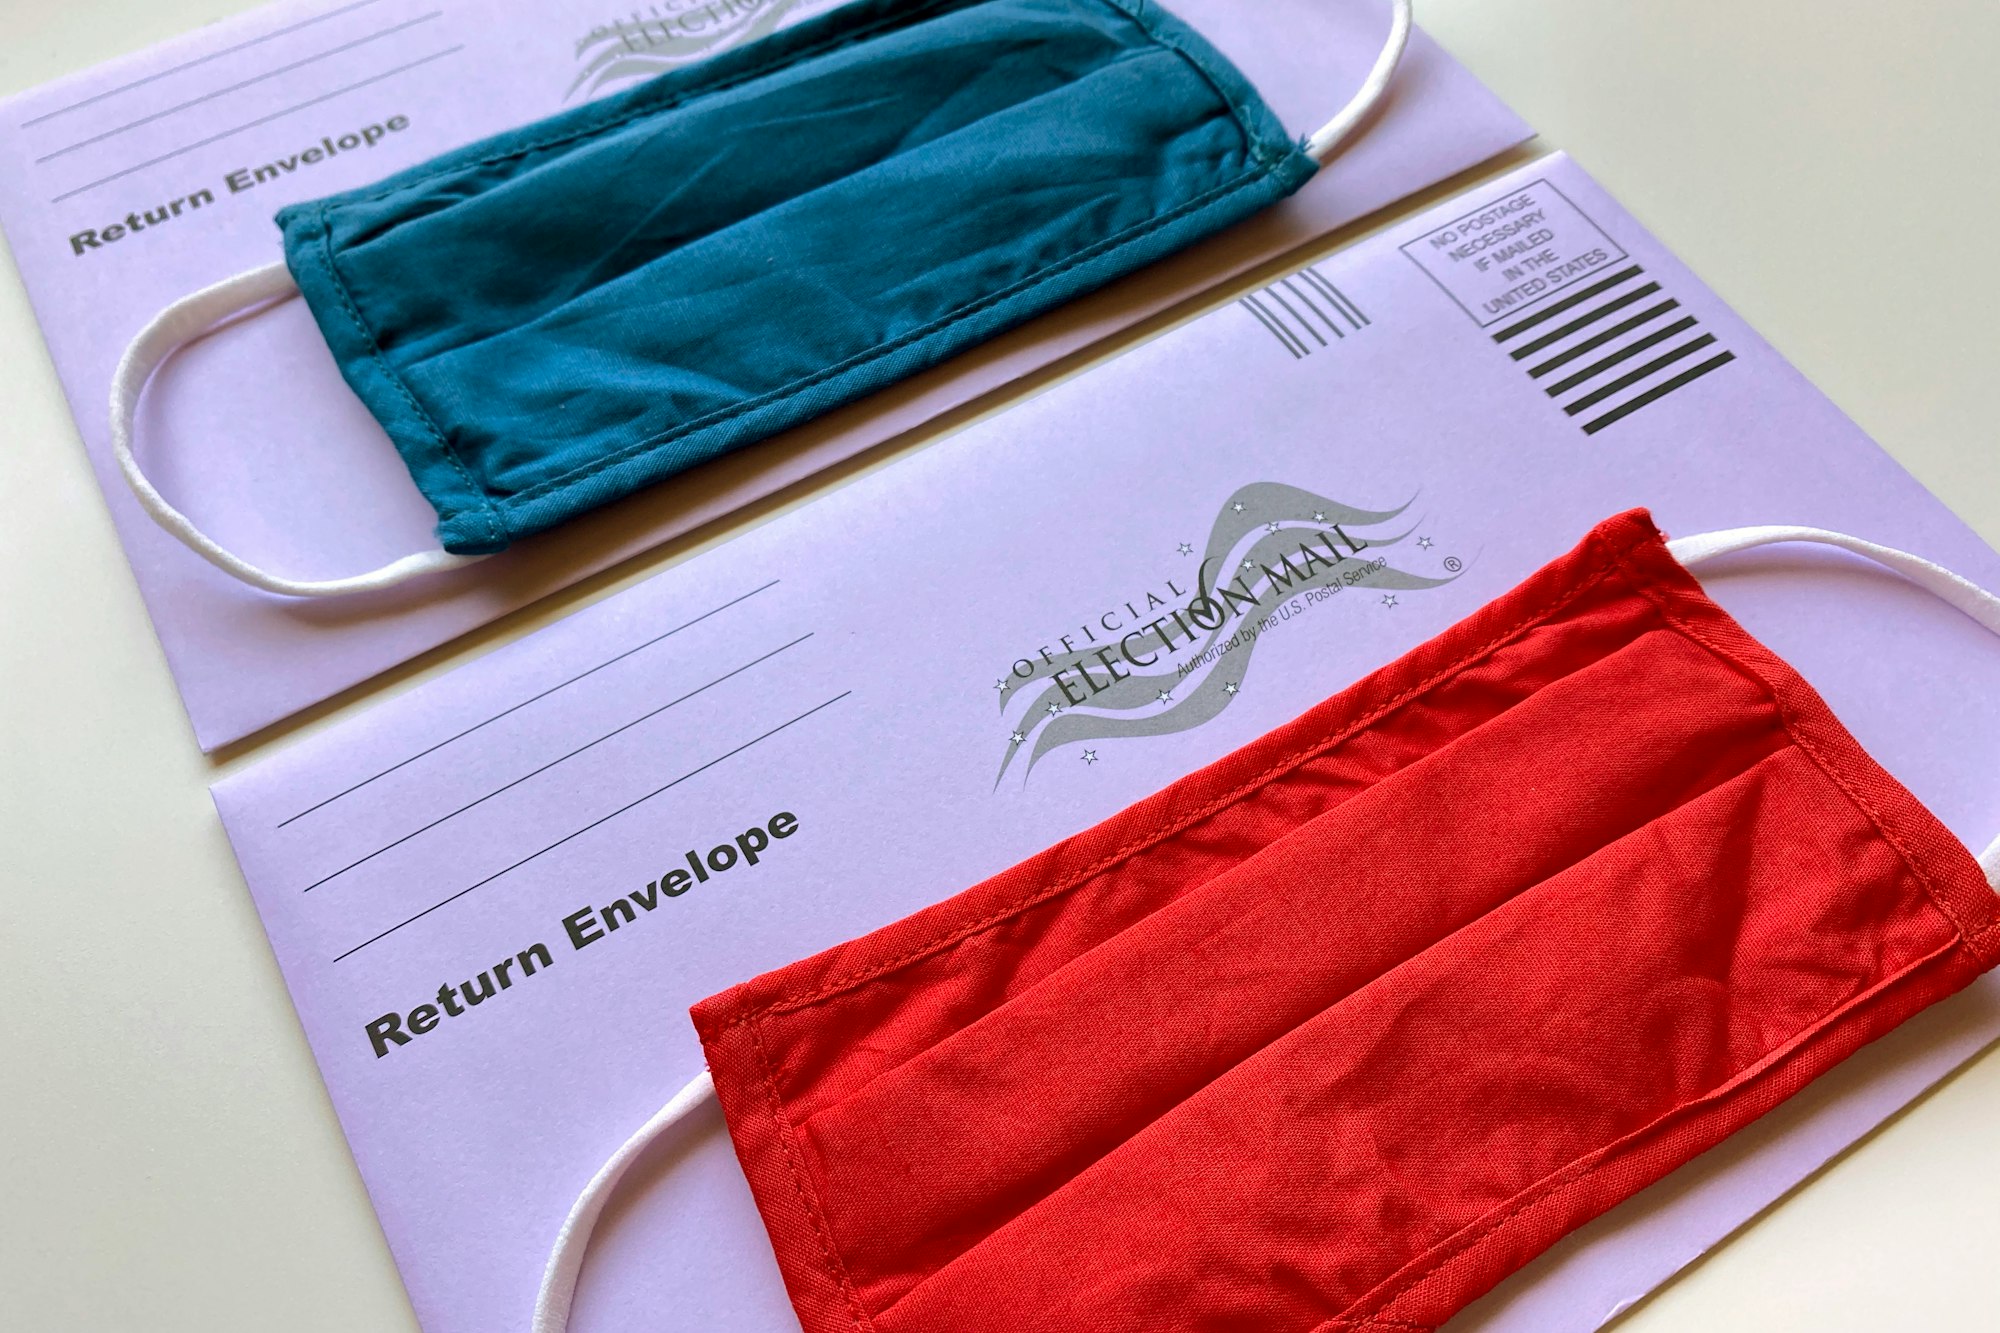 Election mail envelopes with face masks